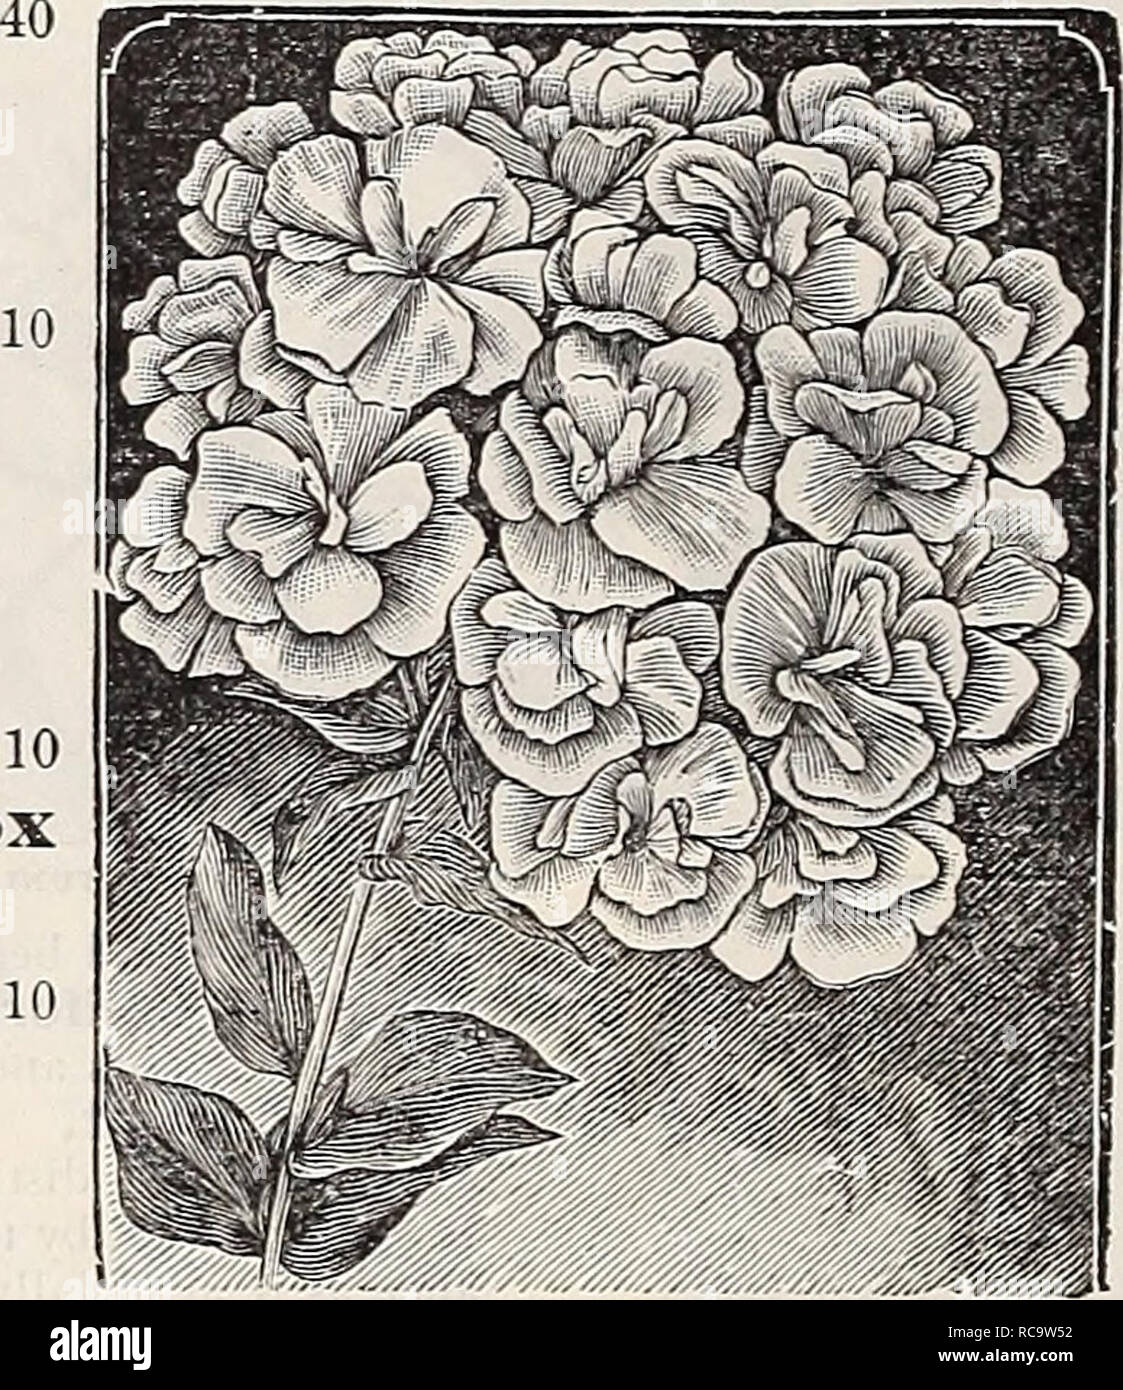 . Dreer's 1907 garden book. Seeds Catalogs; Nursery stock Catalogs; Gardening Equipment and supplies Catalogs; Flowers Seeds Catalogs; Vegetables Seeds Catalogs; Fruit Seeds Catalogs. 90 ENRTADREER -PHILAMIA^A PHLOX DRUMMONDI. Of all summer-flowering annuals the varieties of Phlox Drummondi are unques- tionably one of the most brilliant and satisfactory. Seed may be sown in the open ground any time after danger from frost is past, and in a lew weeks the beds or border-; are aglow with their brilliant coloring, and remain so until fiost; for early flowering thjy should be started indoors or in  Stock Photo